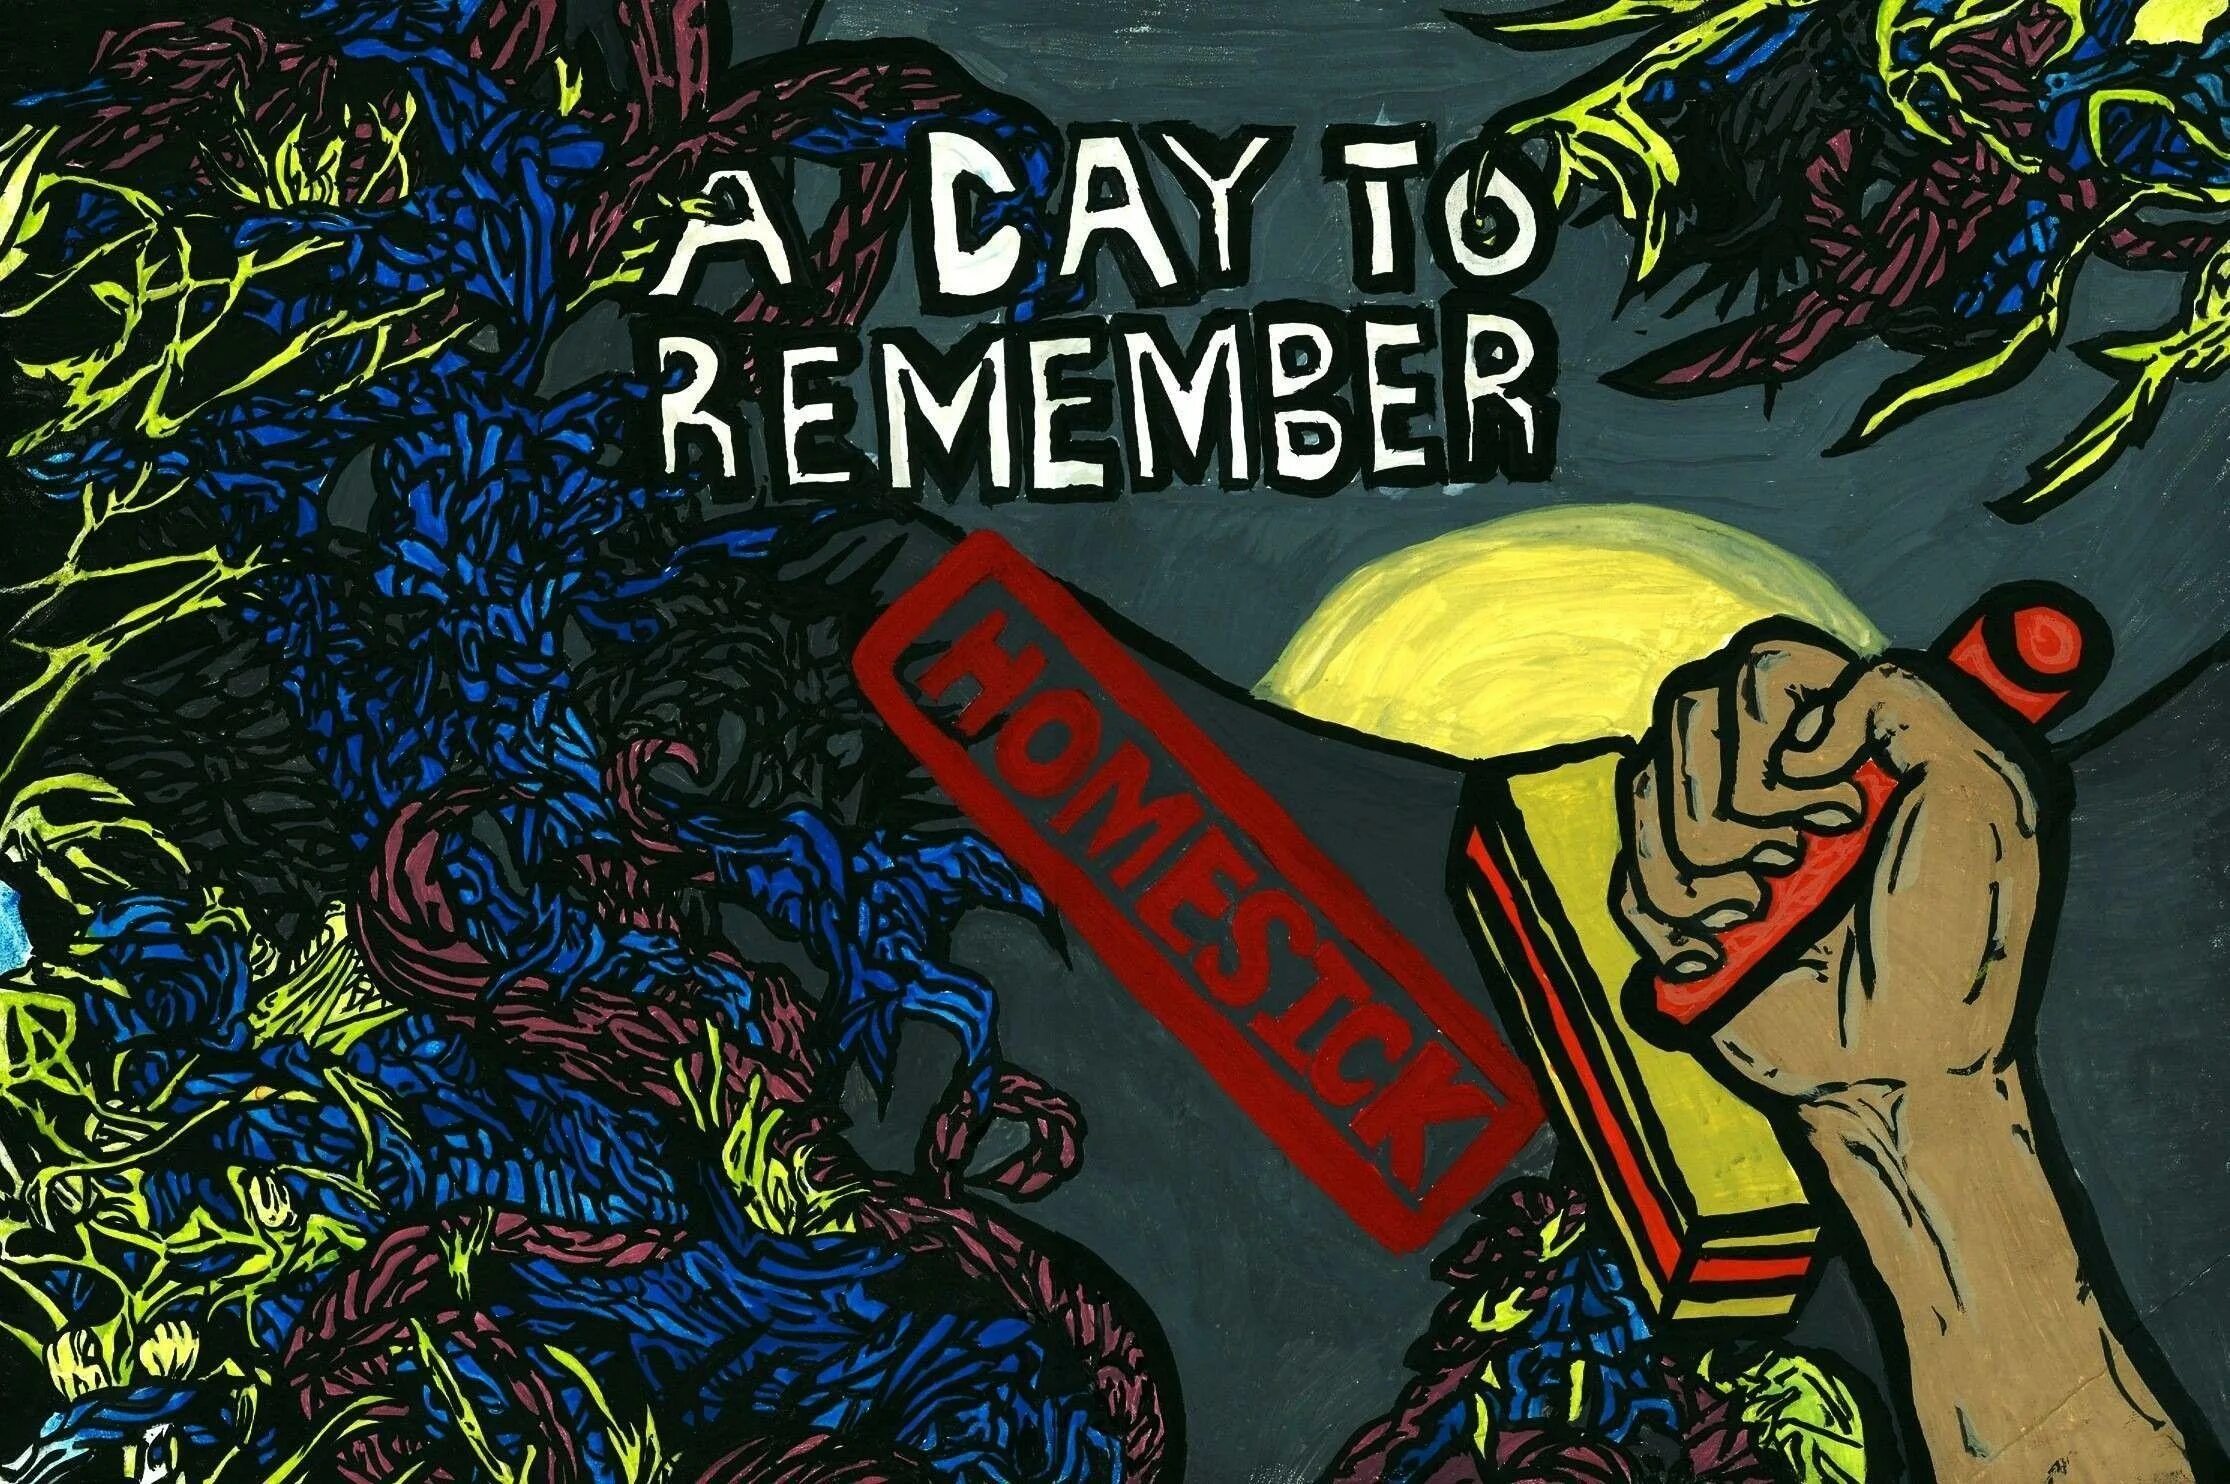 A Day to remember. A Day to remember логотип. Группа a Day to remember. A Day to remember обложка обои. A year to remember